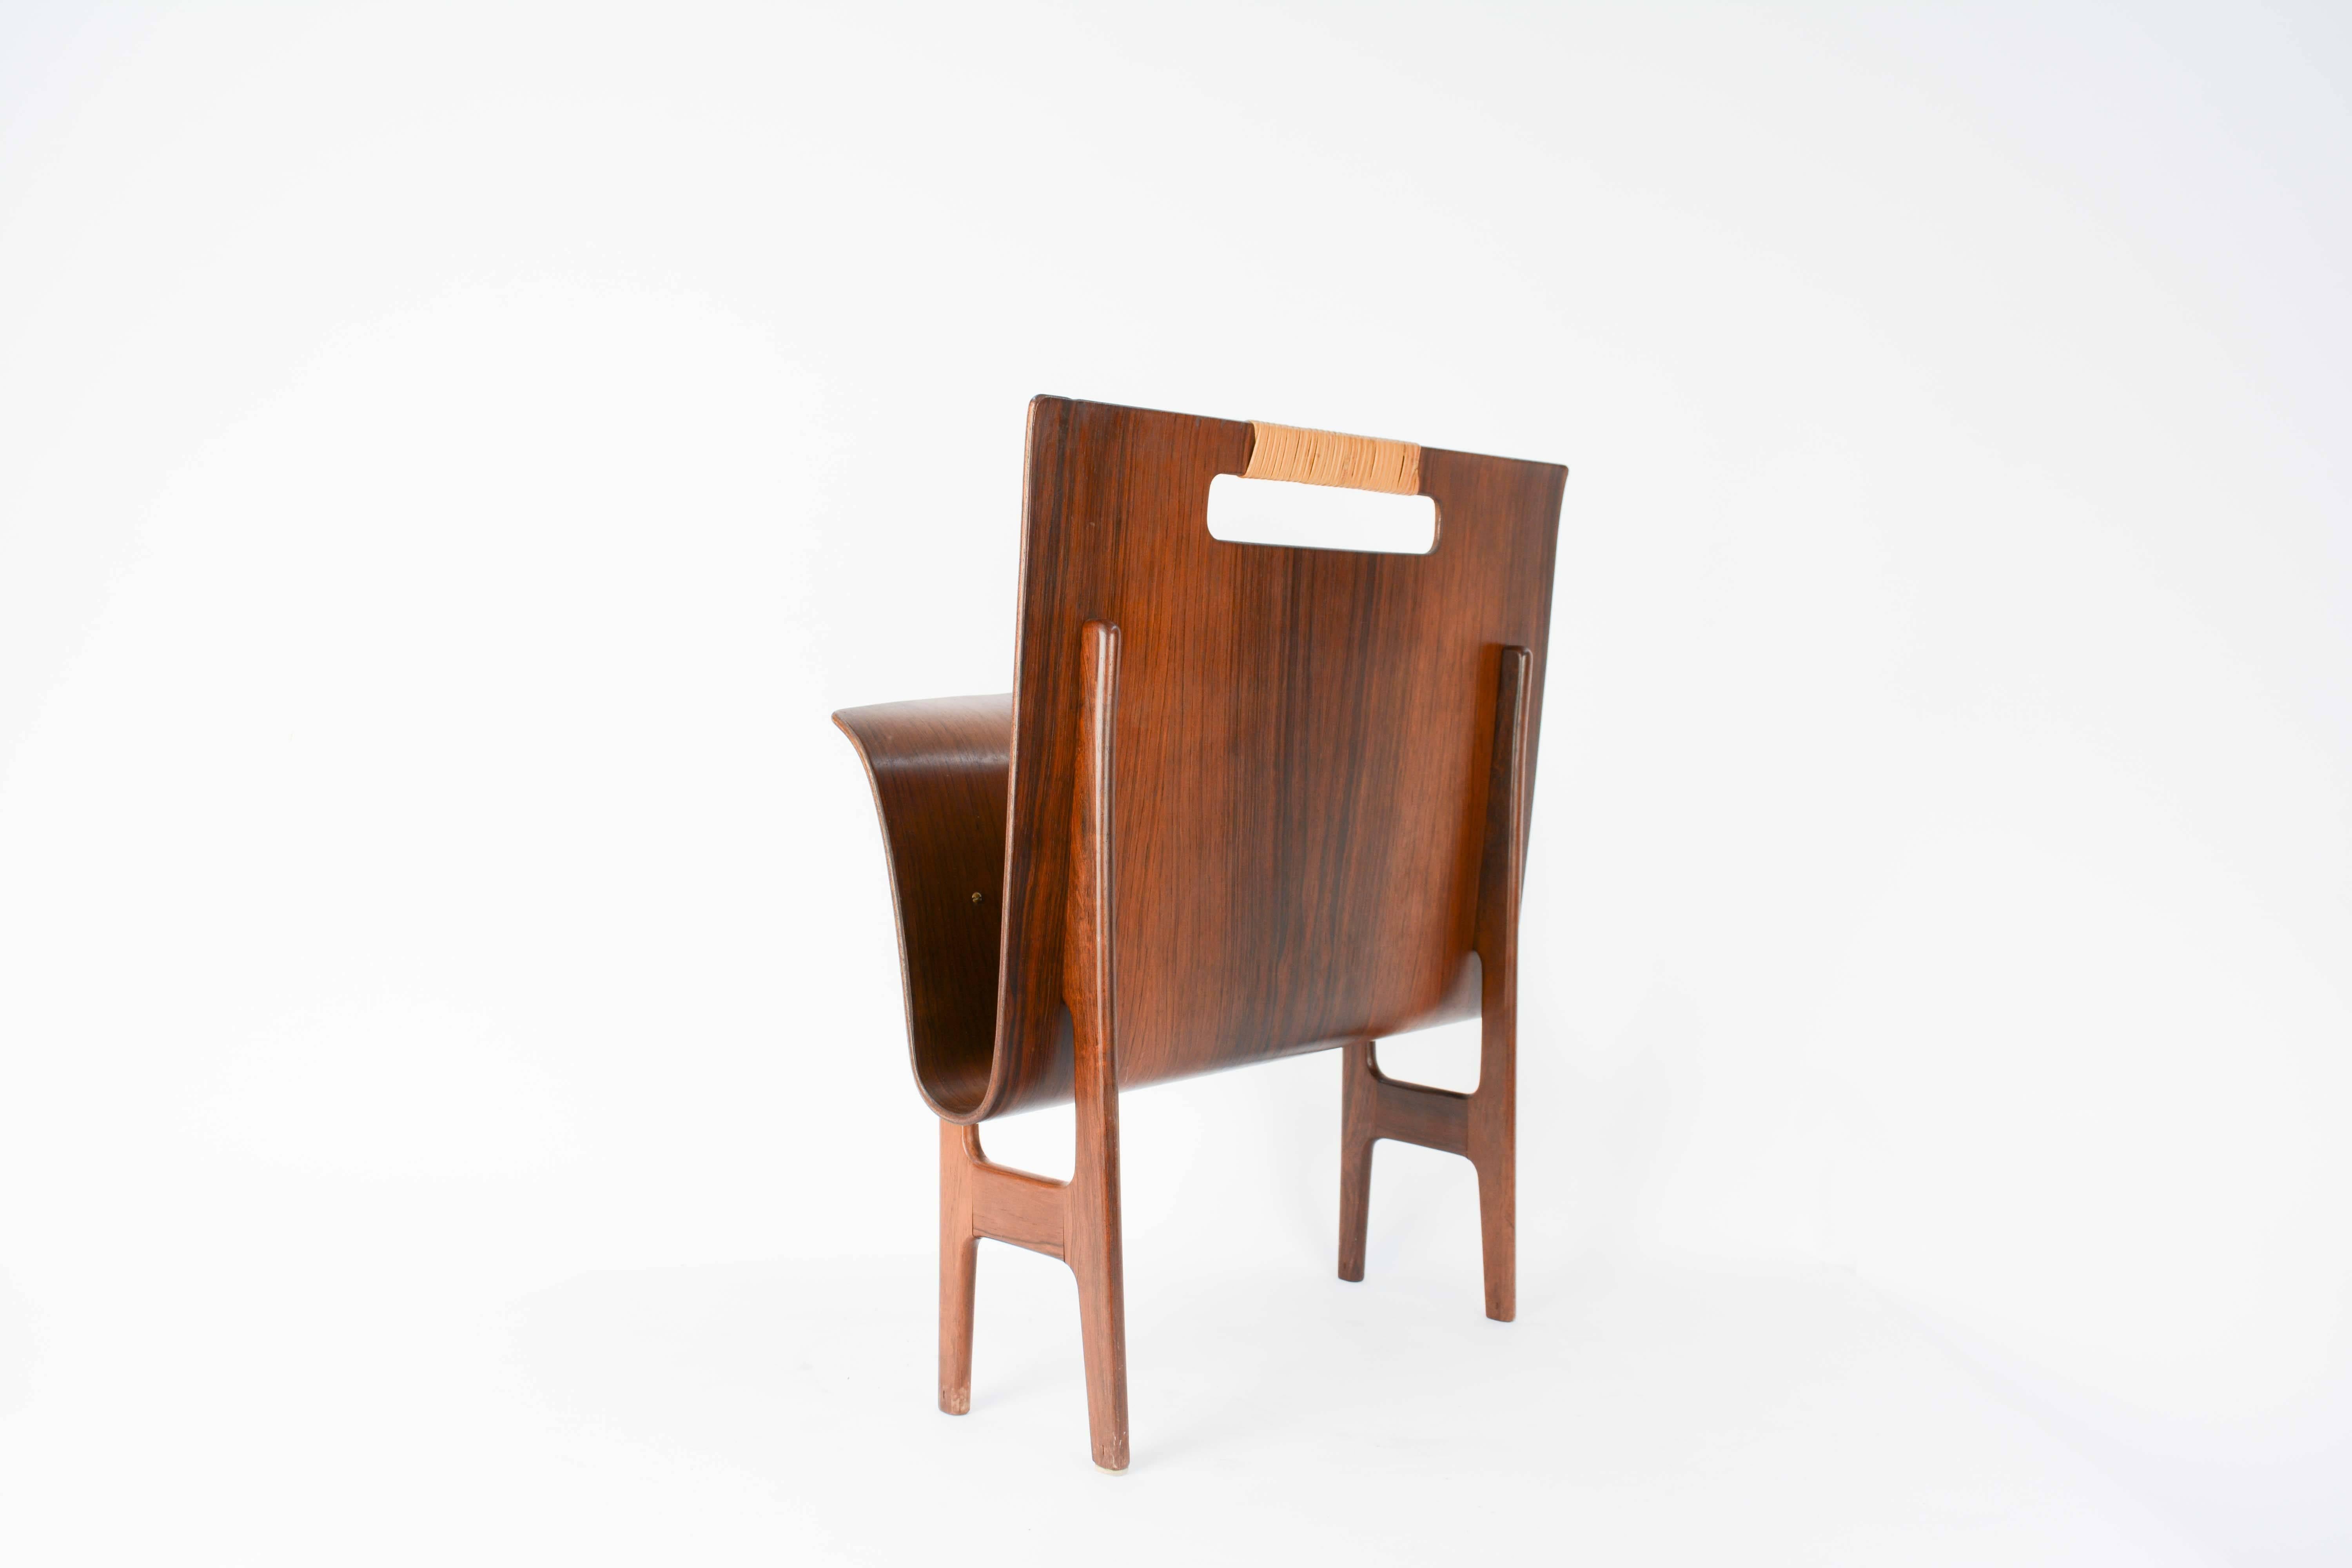 Ejnar Larsen & Axel Bender Madsen Rosewood Magazine Stand from Denmark In Good Condition For Sale In Portland, OR